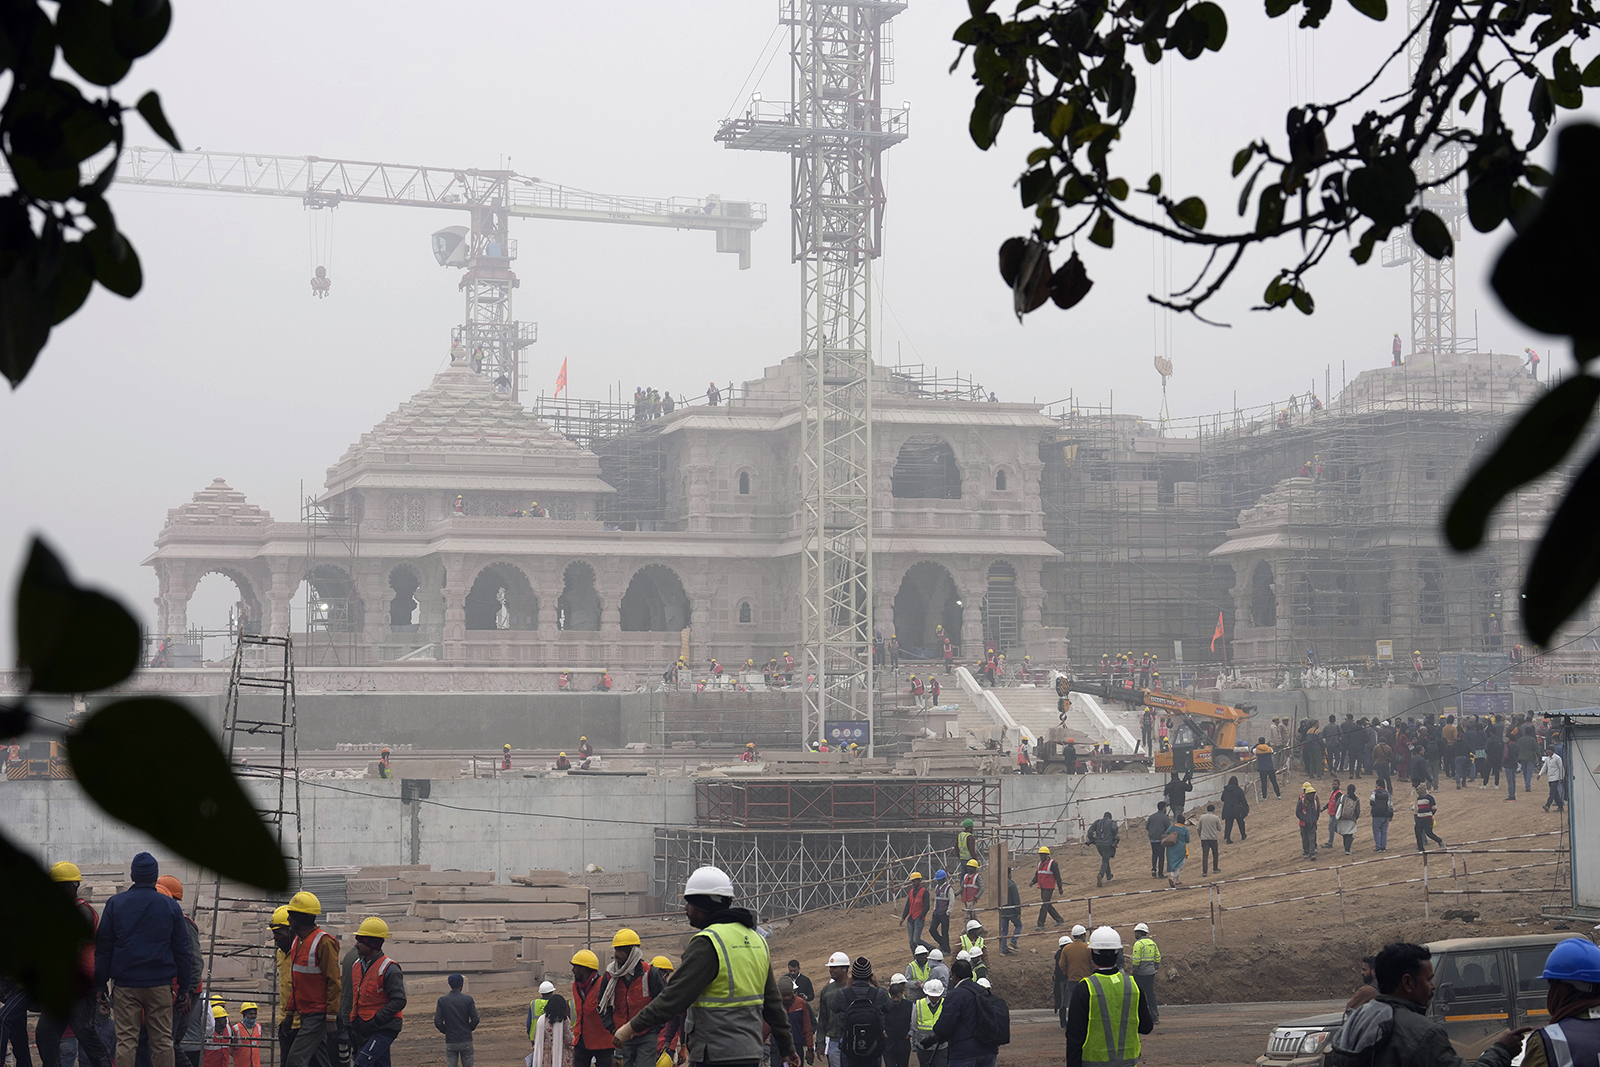 Construction crews work on Ram Mandir, a Hindu temple dedicated to Lord Ram, being built at the site of the demolished Babri Masjid mosque in Ayodhya, India, Friday, Dec. 29, 2023. The 16th century mosque was destroyed by Hindu radicals in December 1992, sparking massive Hindu-Muslim violence that left some 2,000 people dead. The Supreme Court's verdict allowed a temple to be built in place of the demolished mosque. (AP Photo/Rajesh Kumar Singh)